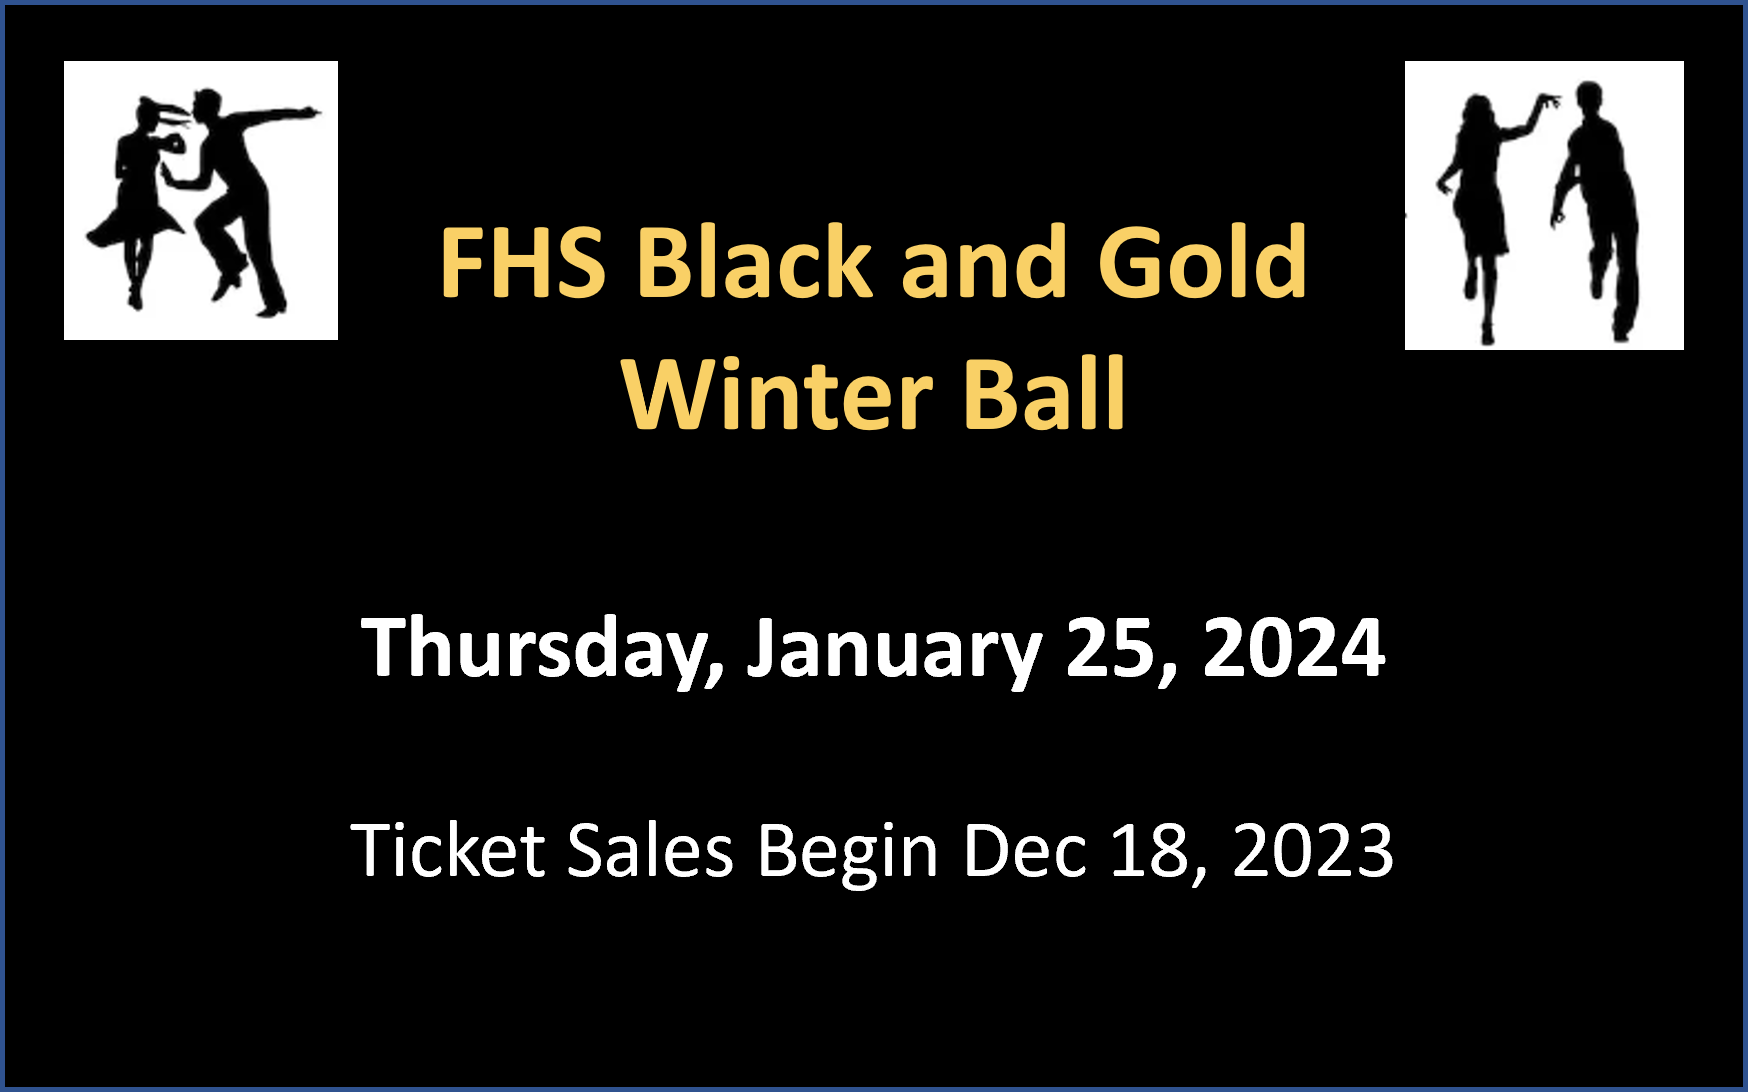 Black and Gold Winter Ball